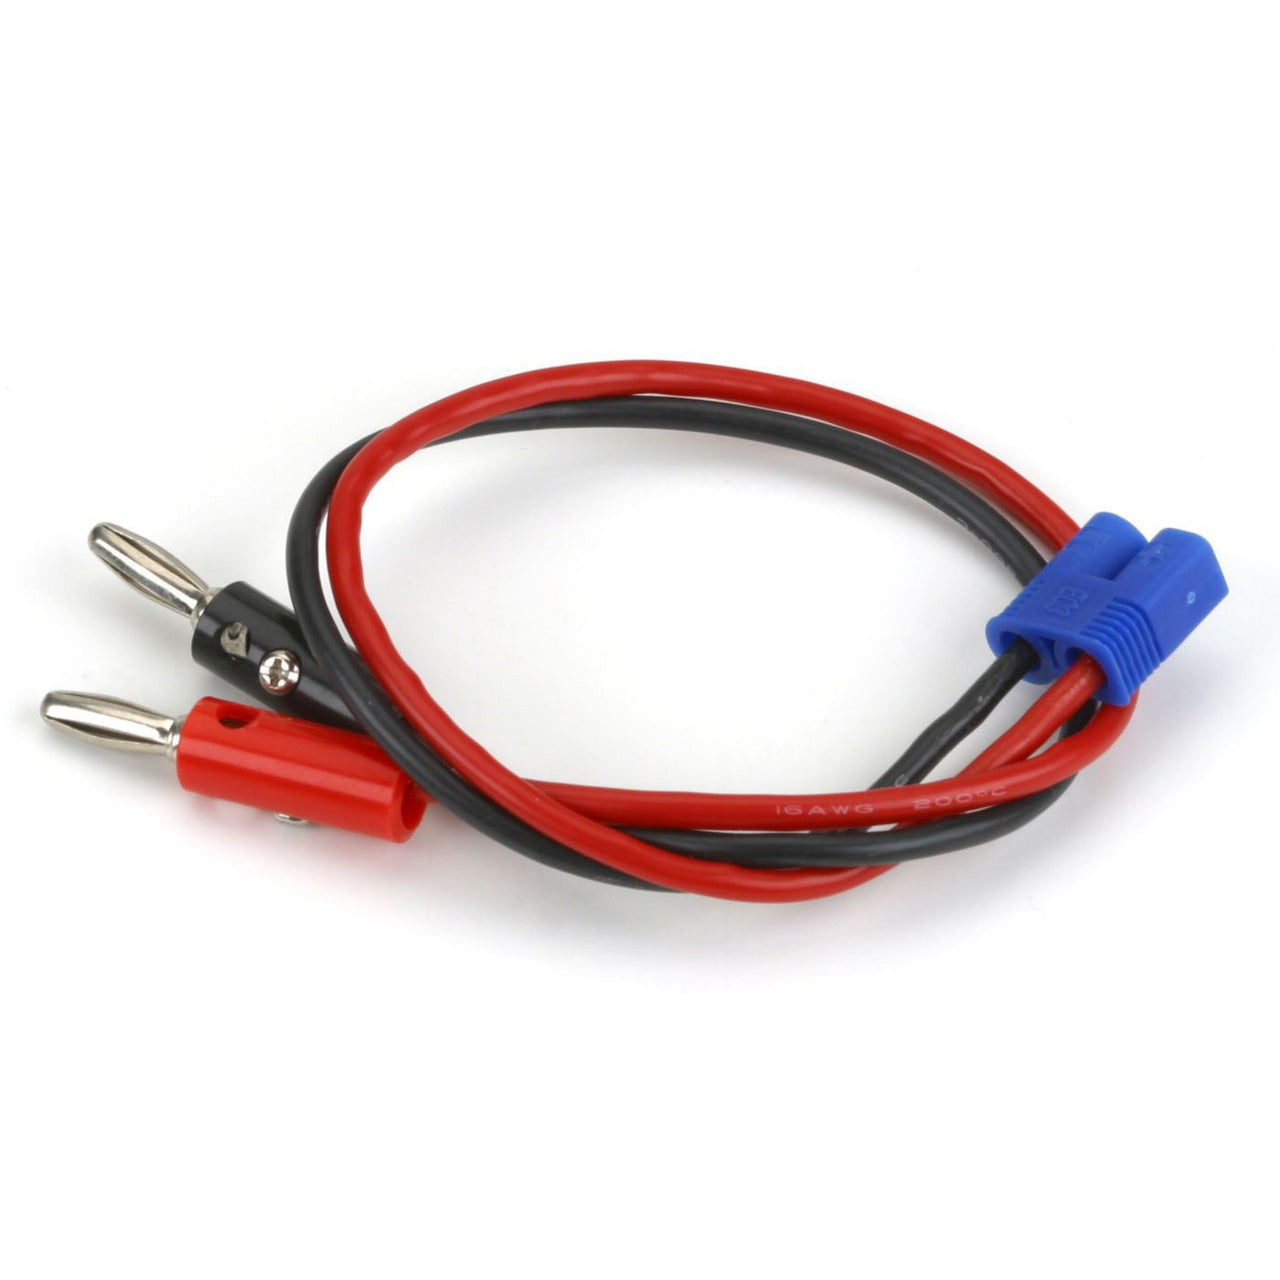 DYNC0018 EC3 Charge Lead with 12" Wire & Jacks